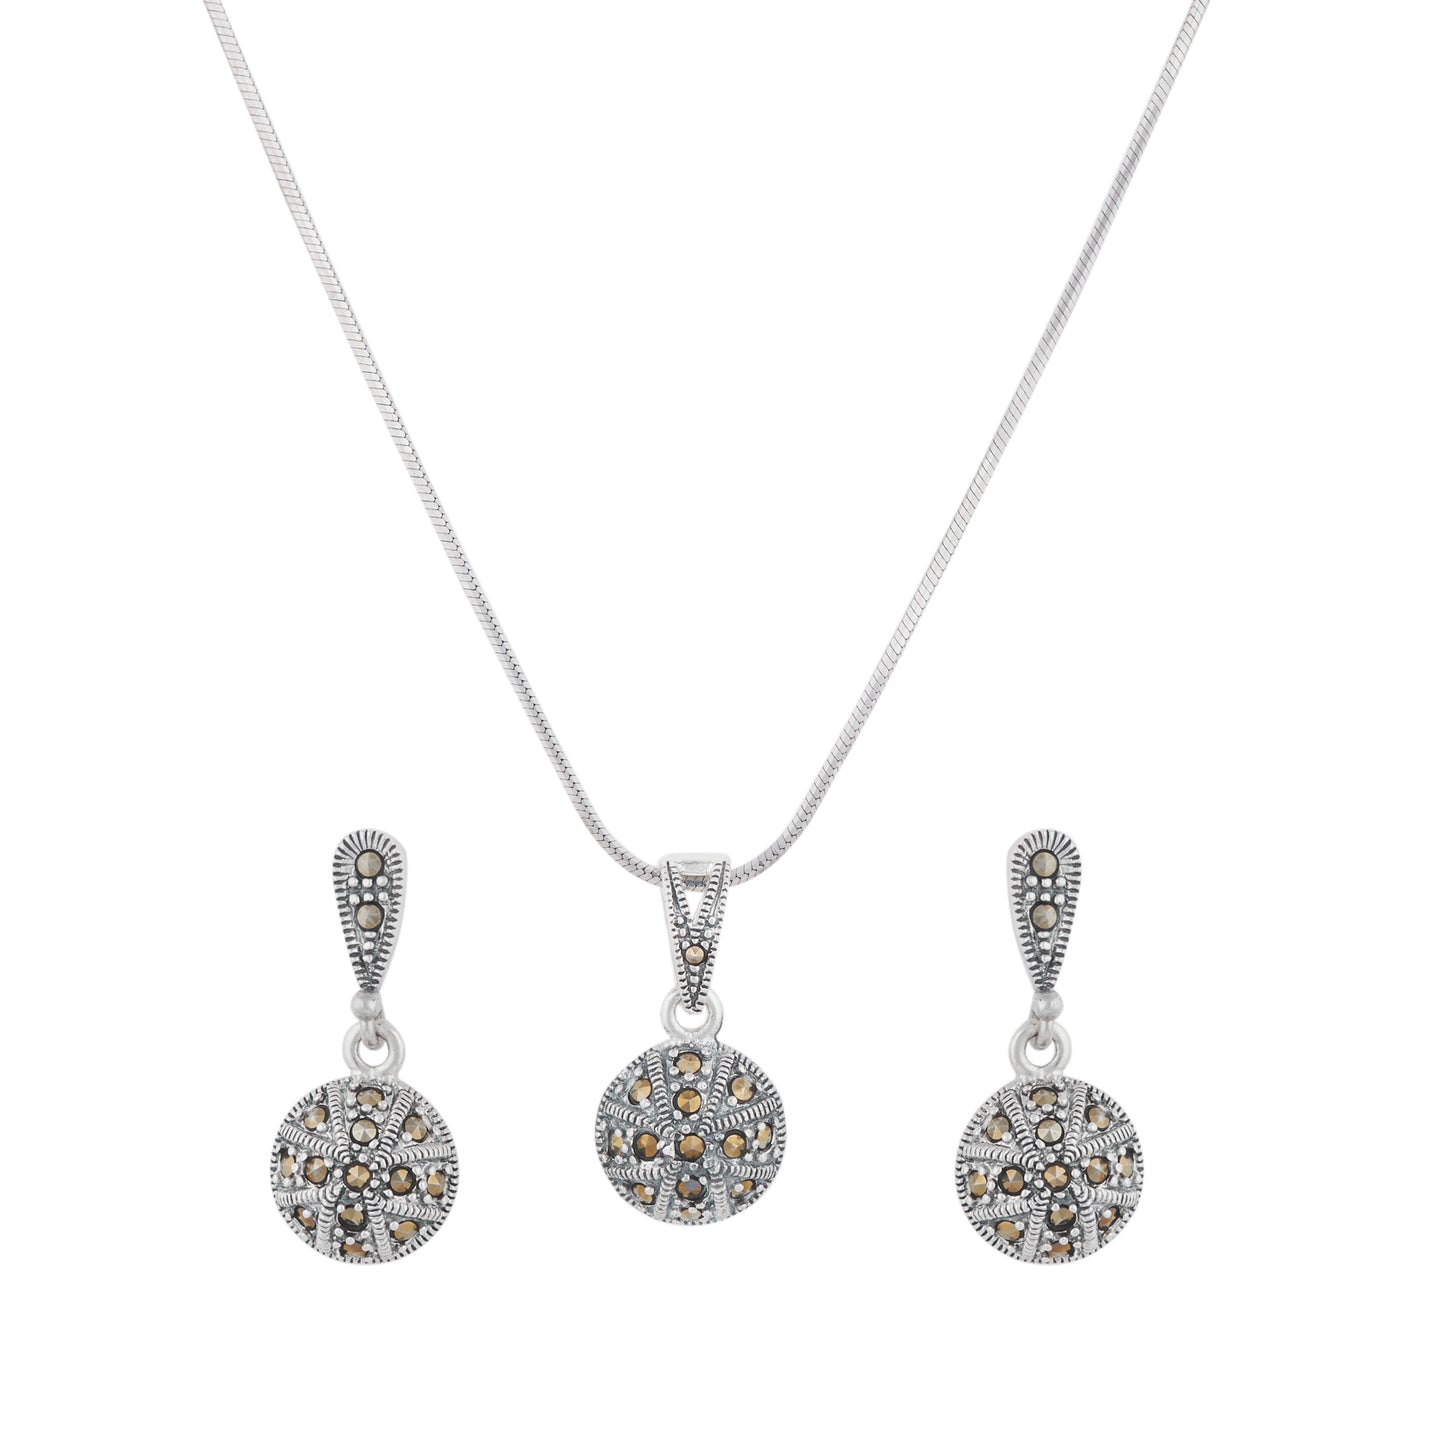 Antique Silver Crystal Dome Necklace Set